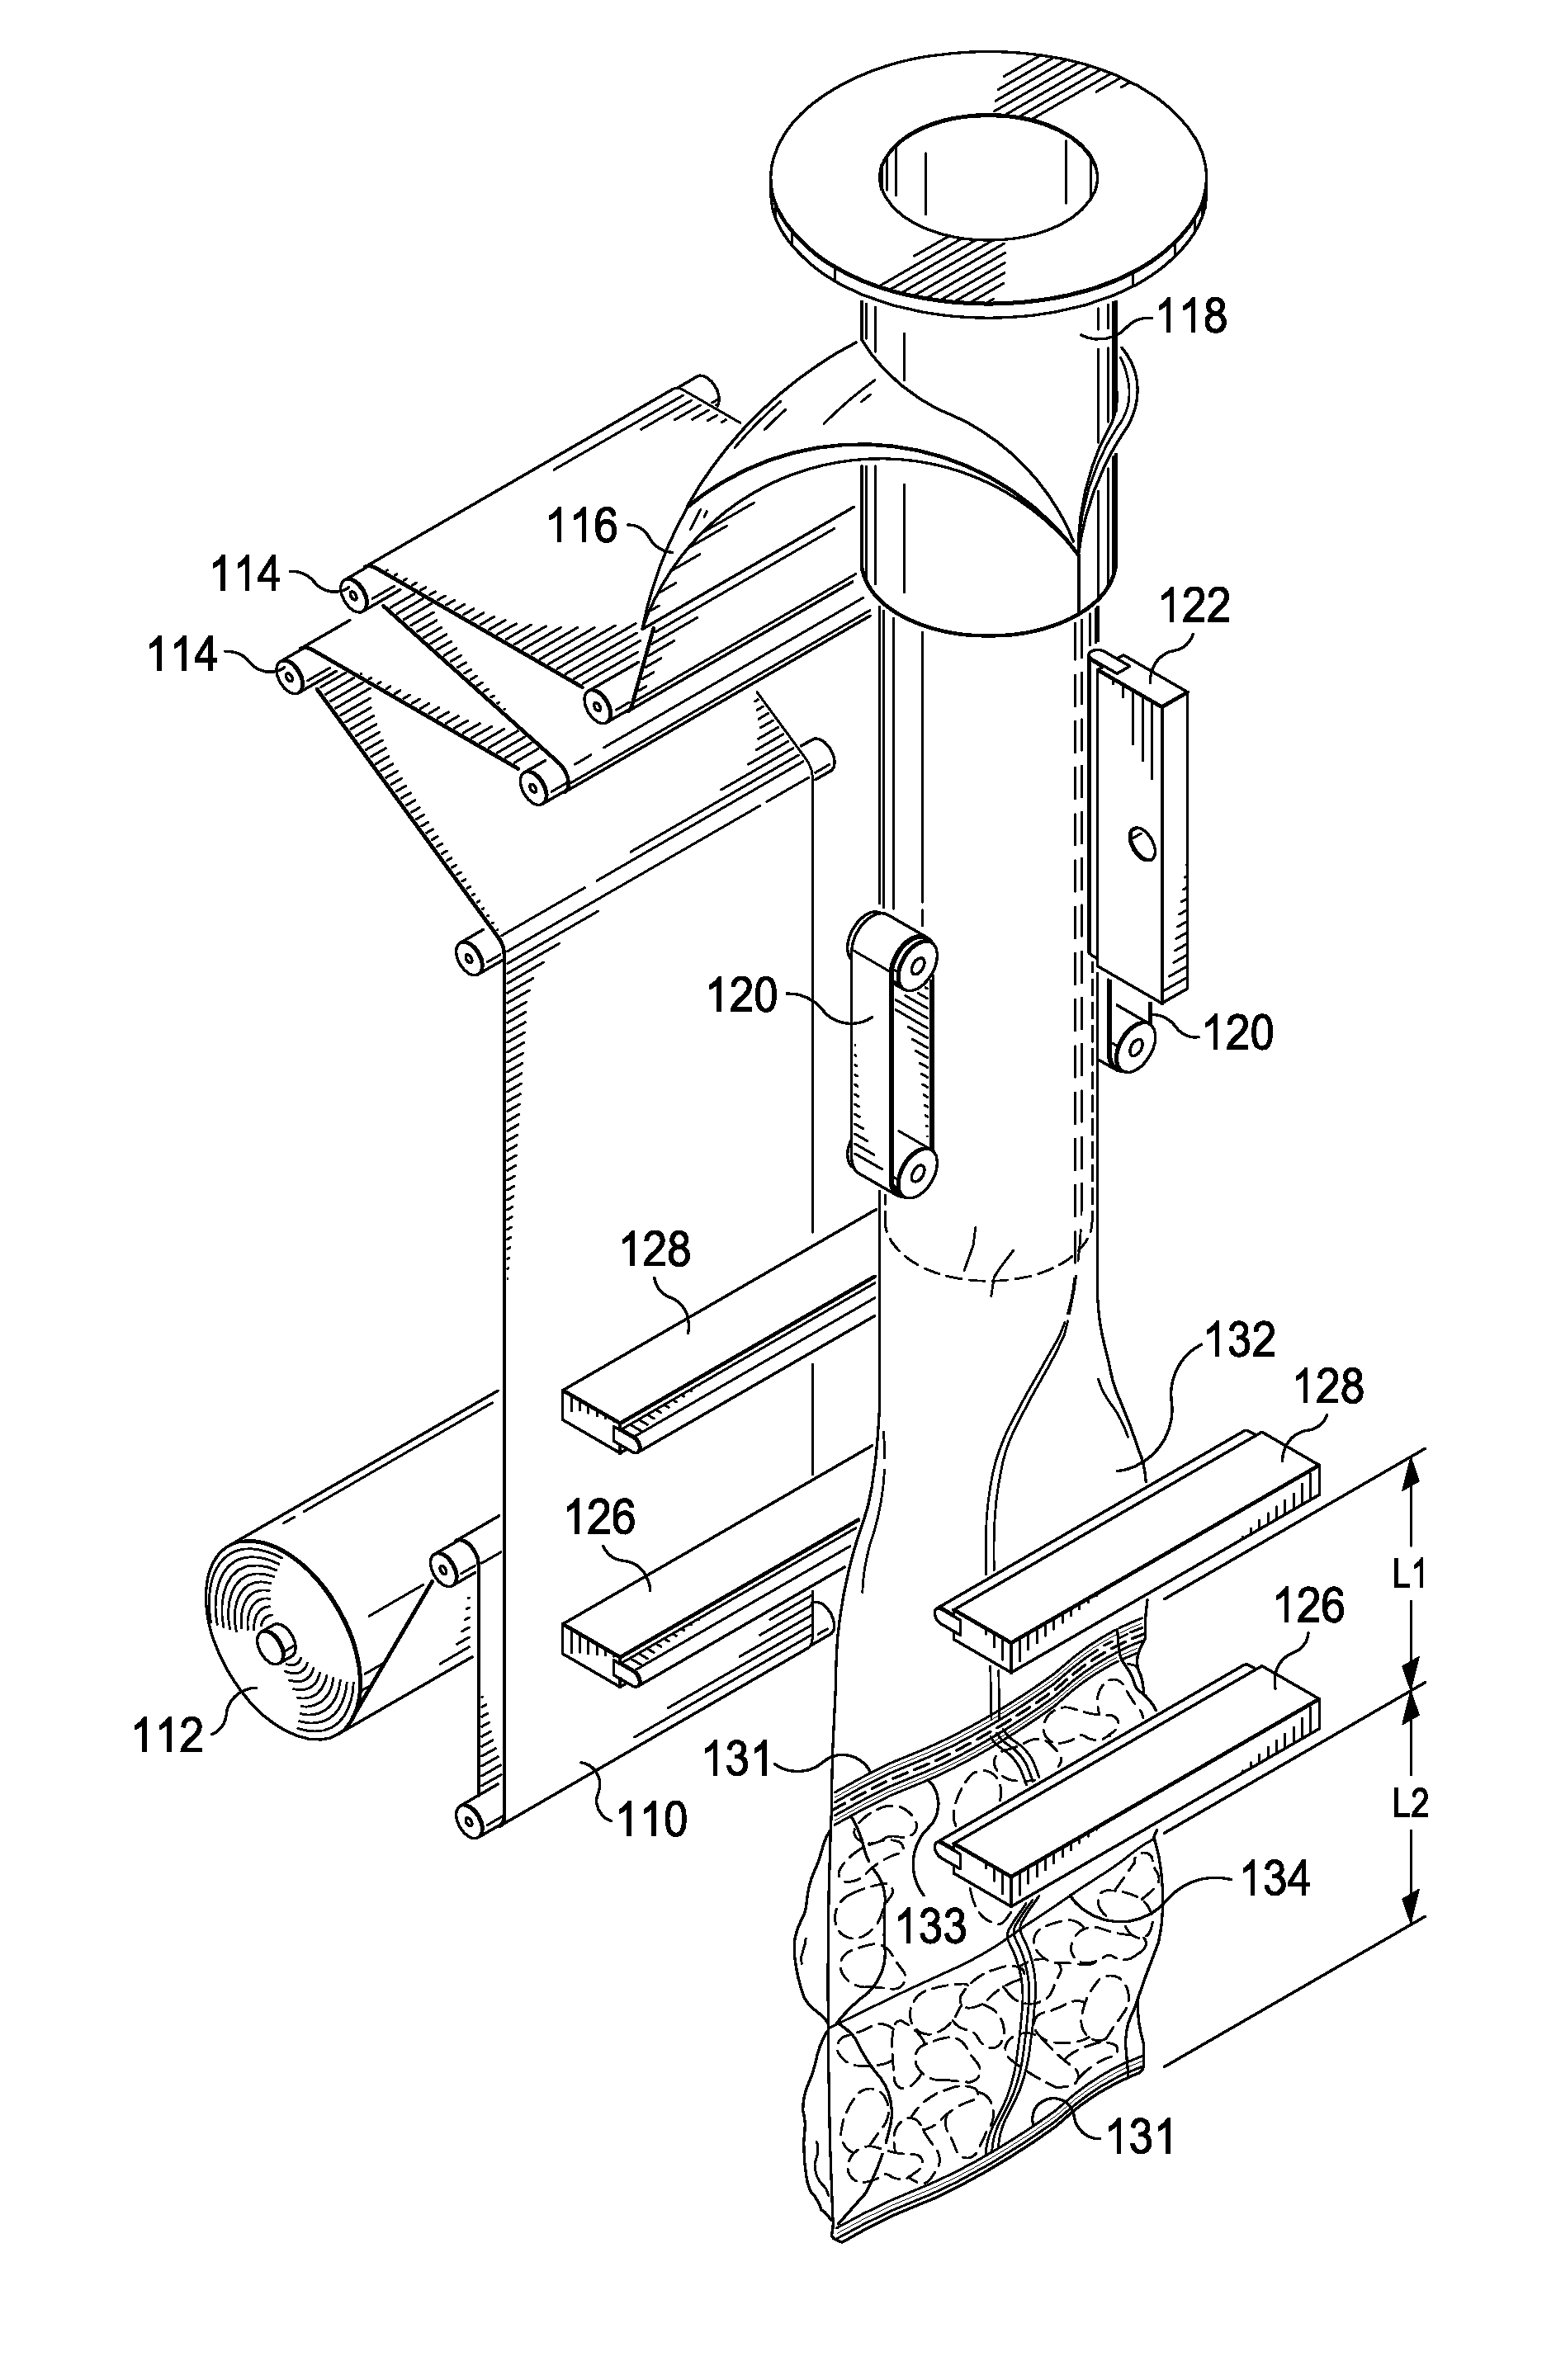 Method and apparatus for producing multi-compartment packages